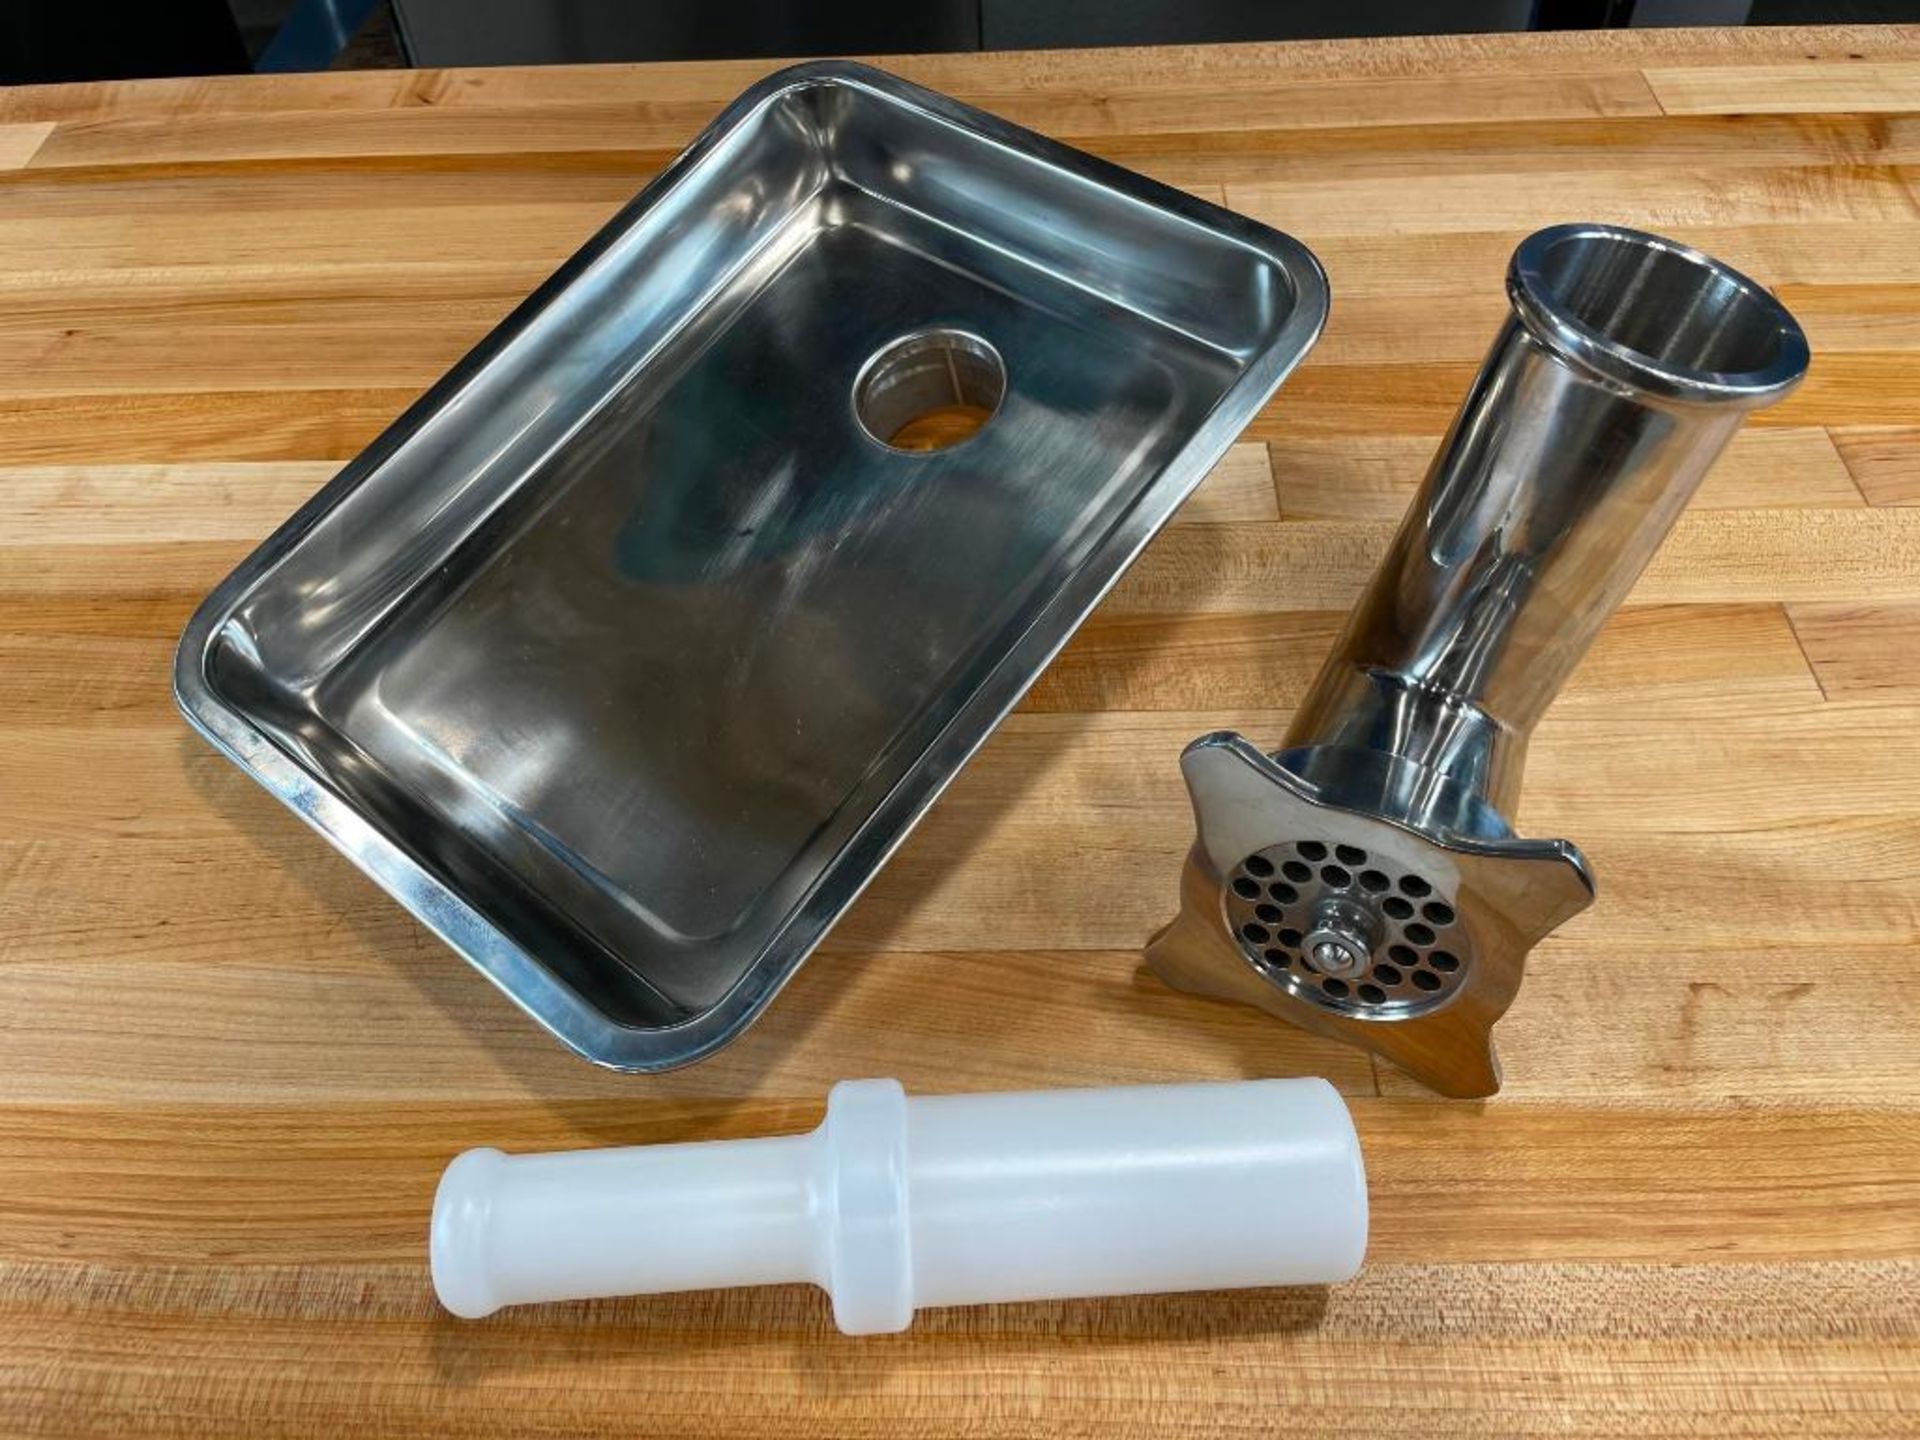 ALL STAINLESS #12 MEAT GRINDER ATTACHMENT FOR MIXERS - Image 2 of 5